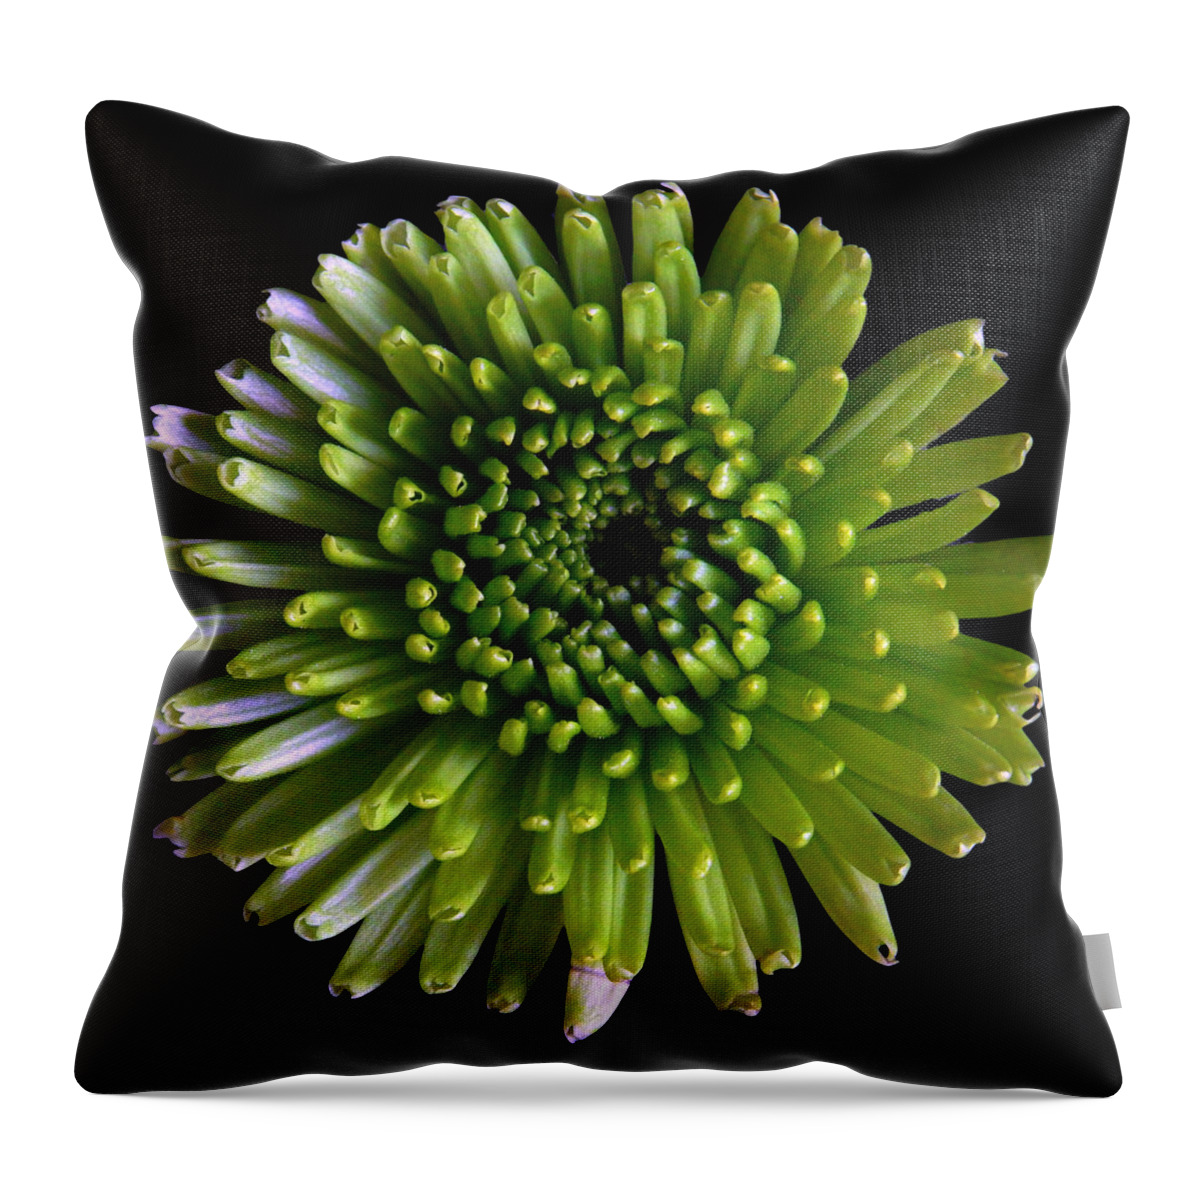 Flowers Throw Pillow featuring the photograph Green Chrysanthemum Still Life Flower Art Poster by Lily Malor